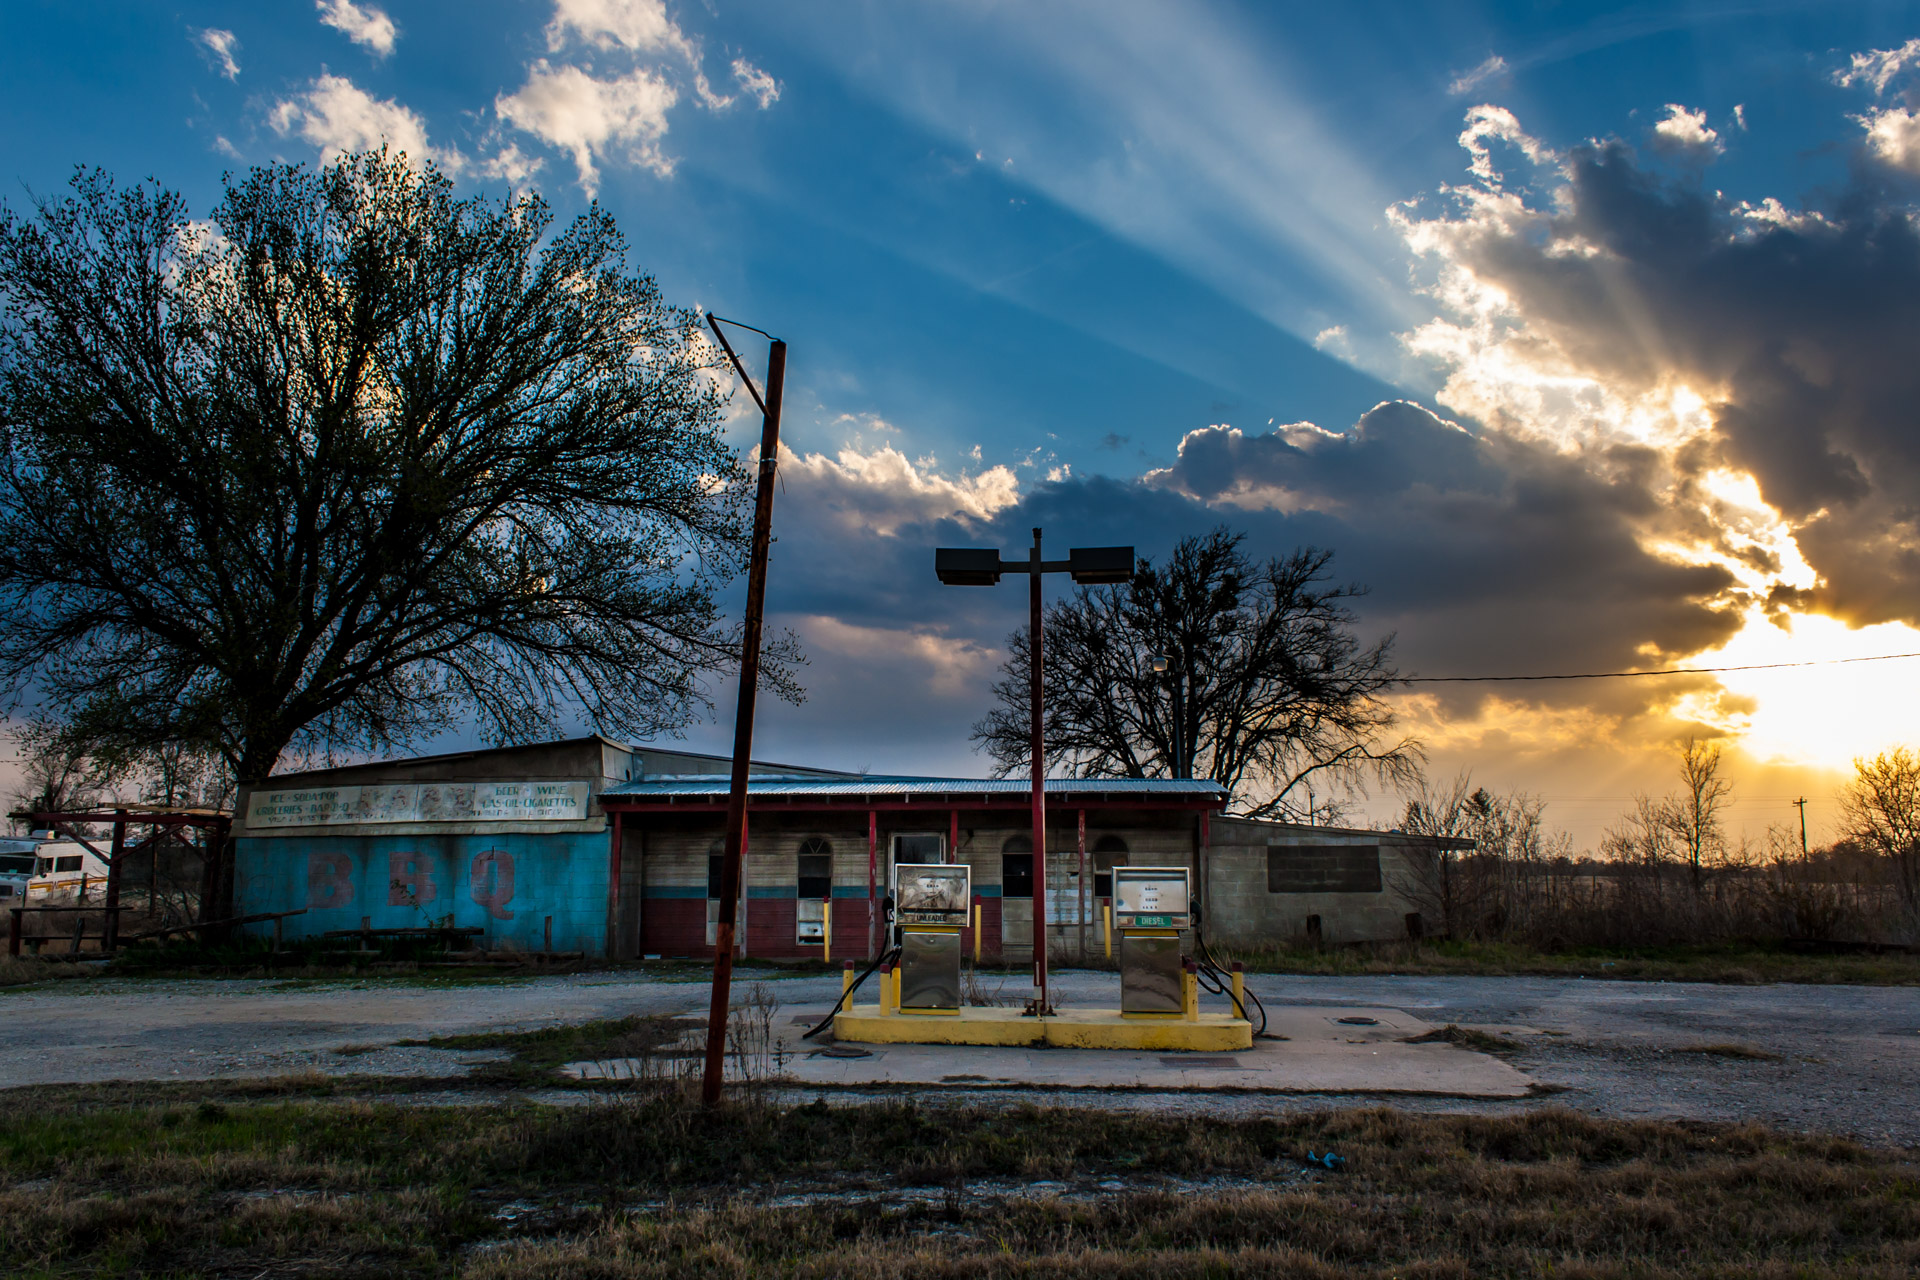 Elgin, Texas - BBQ And Gas Station (front far sunset)